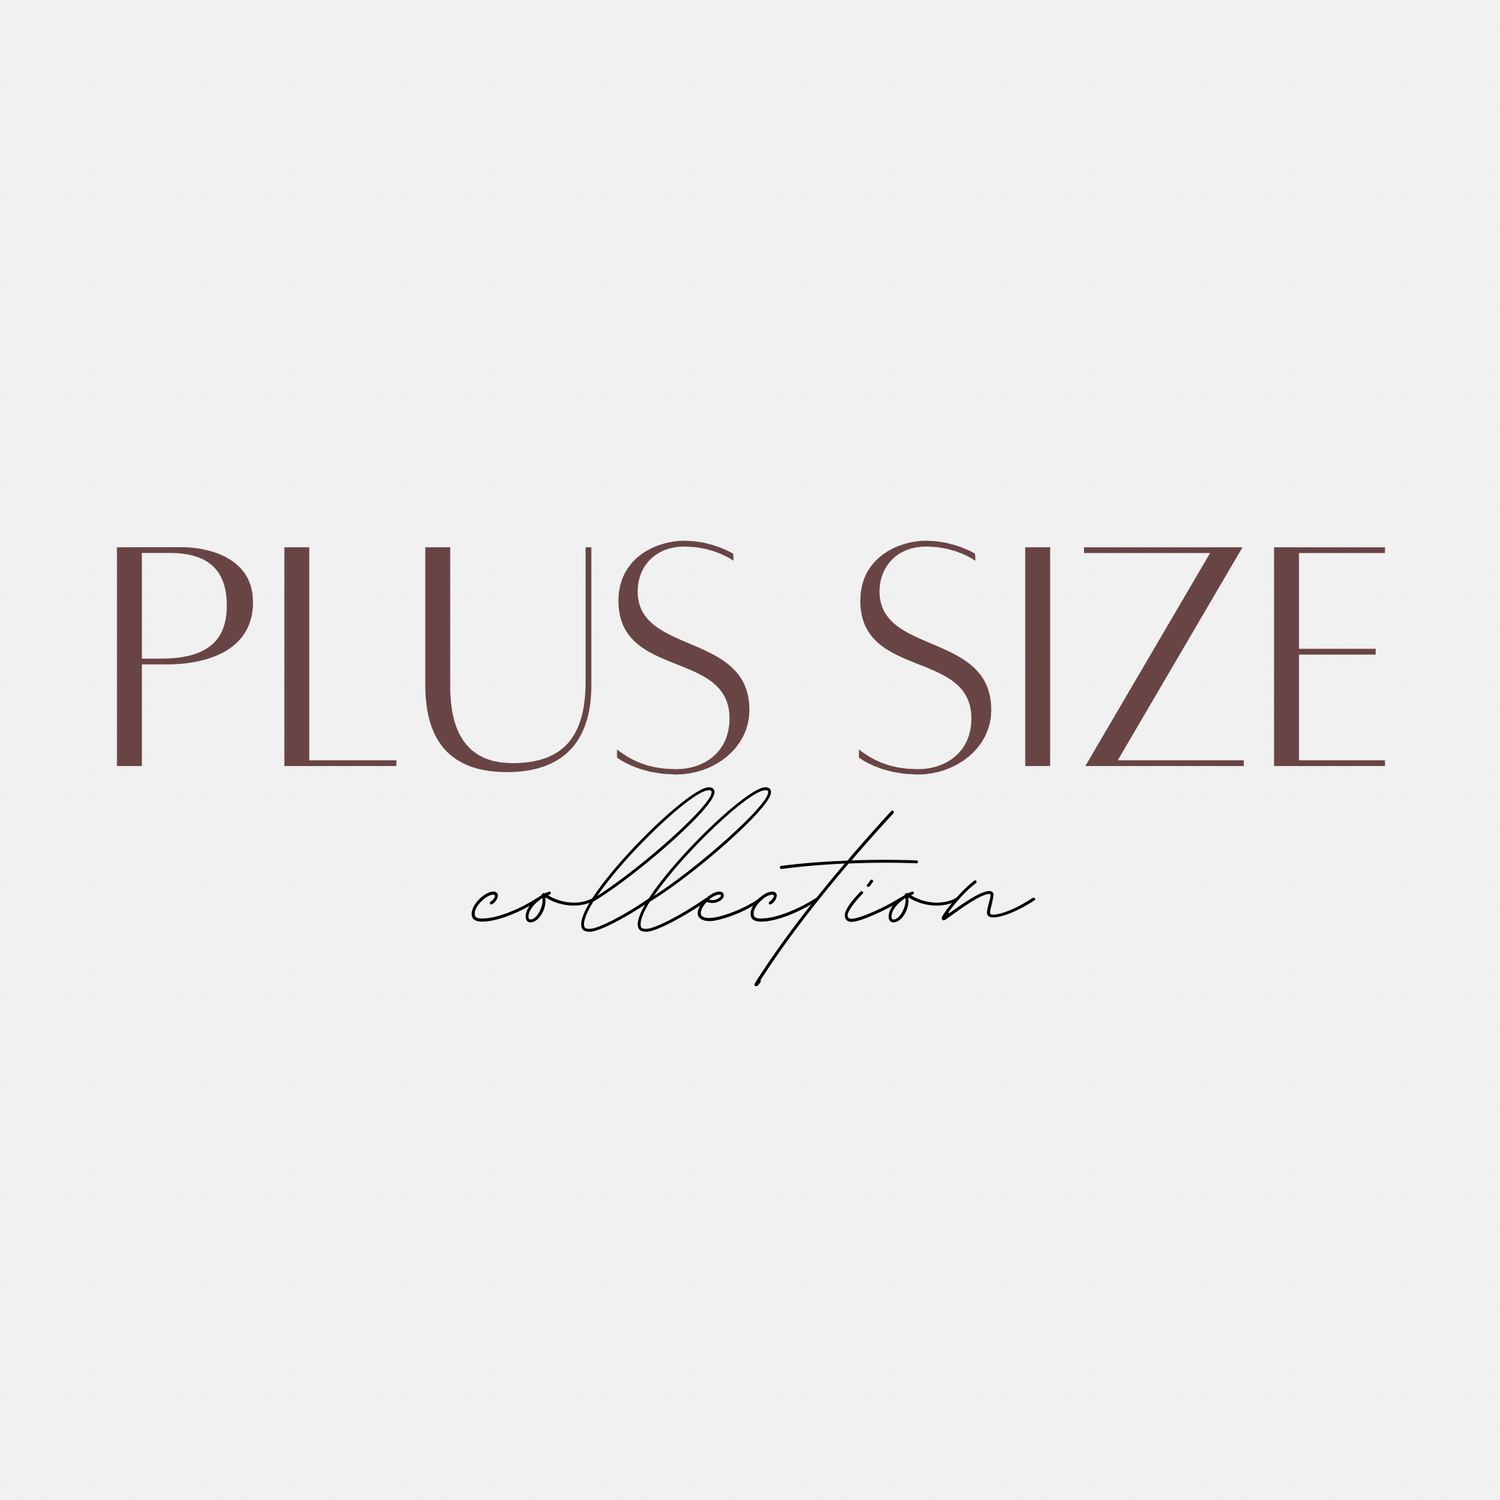 Plus Size Collection